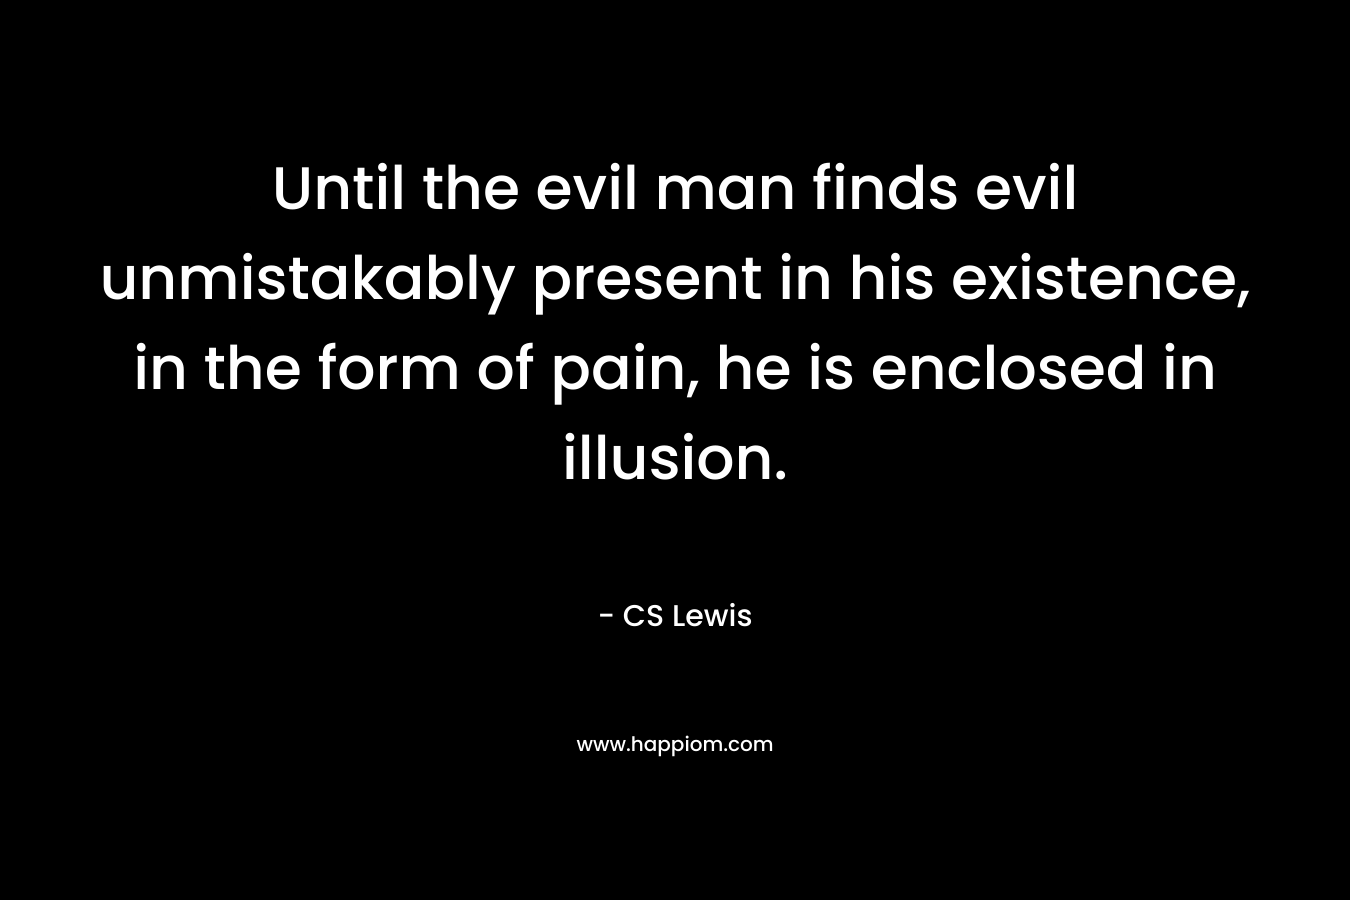 Until the evil man finds evil unmistakably present in his existence, in the form of pain, he is enclosed in illusion. – CS Lewis